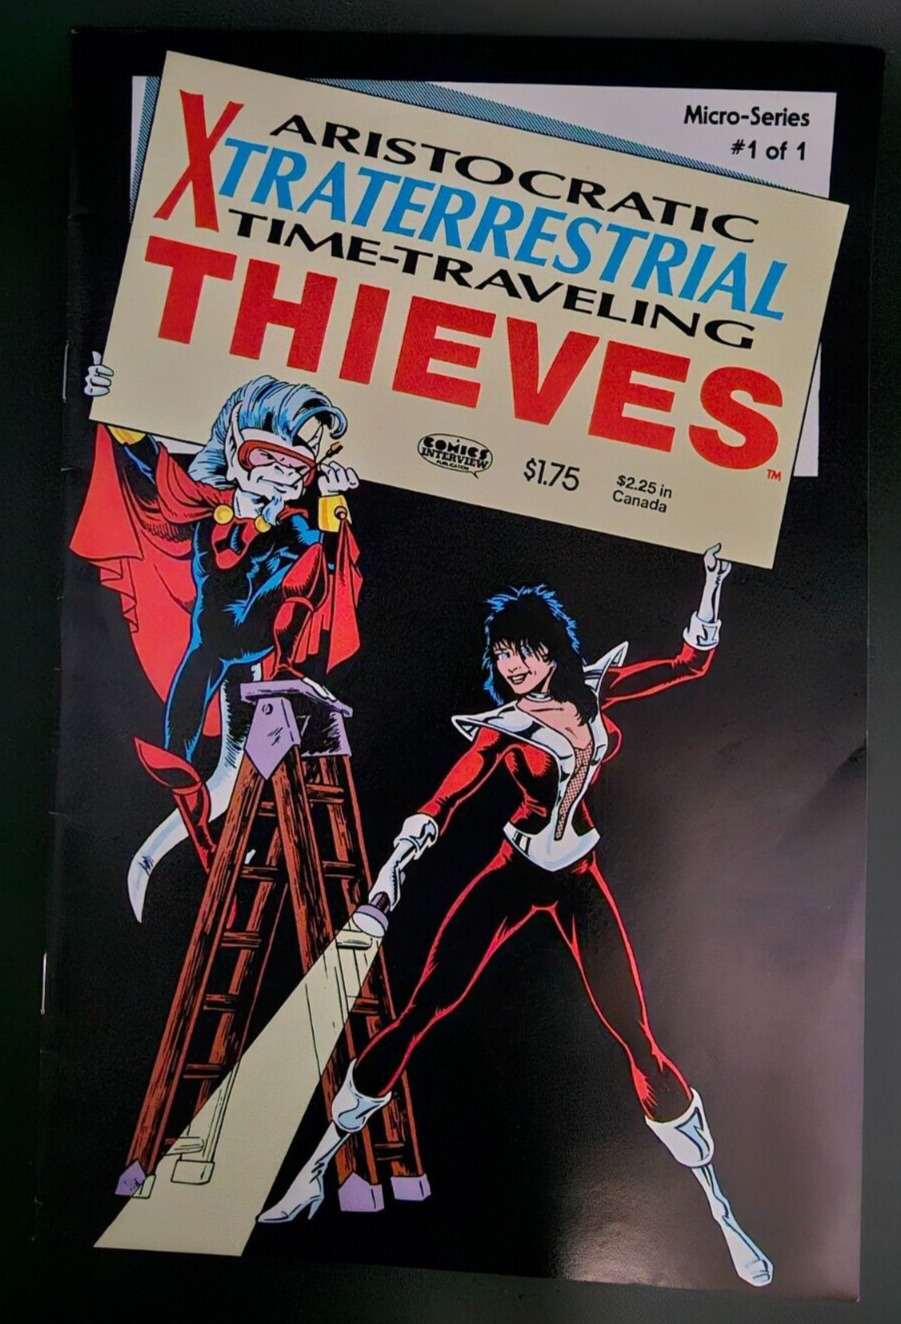 ARISTOCRATIC XTRATERRESTRIAL TIME TRAVELING THIEVES  '86 RAW Comics Interview #1